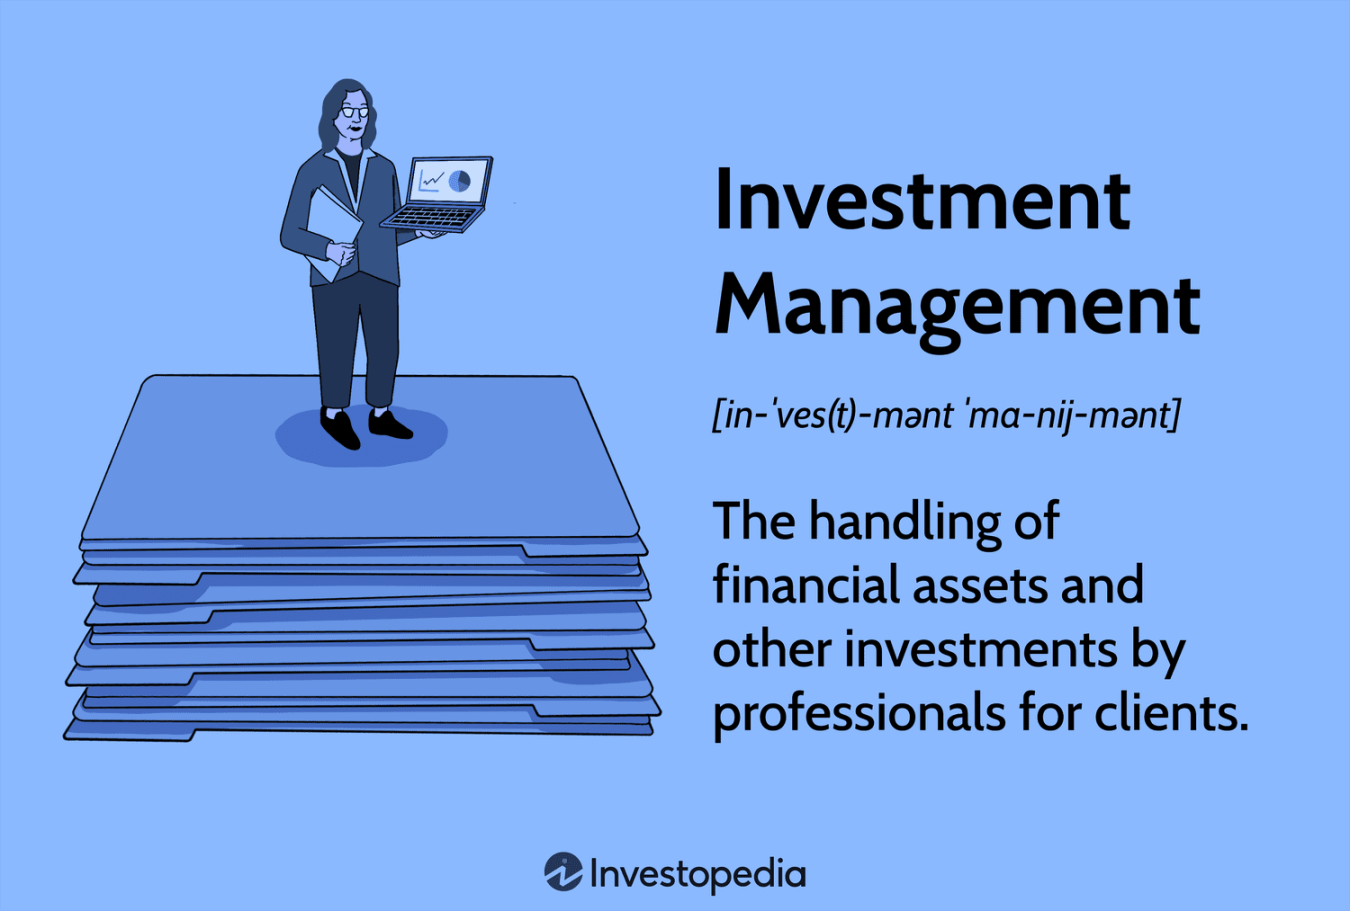 Investment Management: More Than Just Buying and Selling Stocks